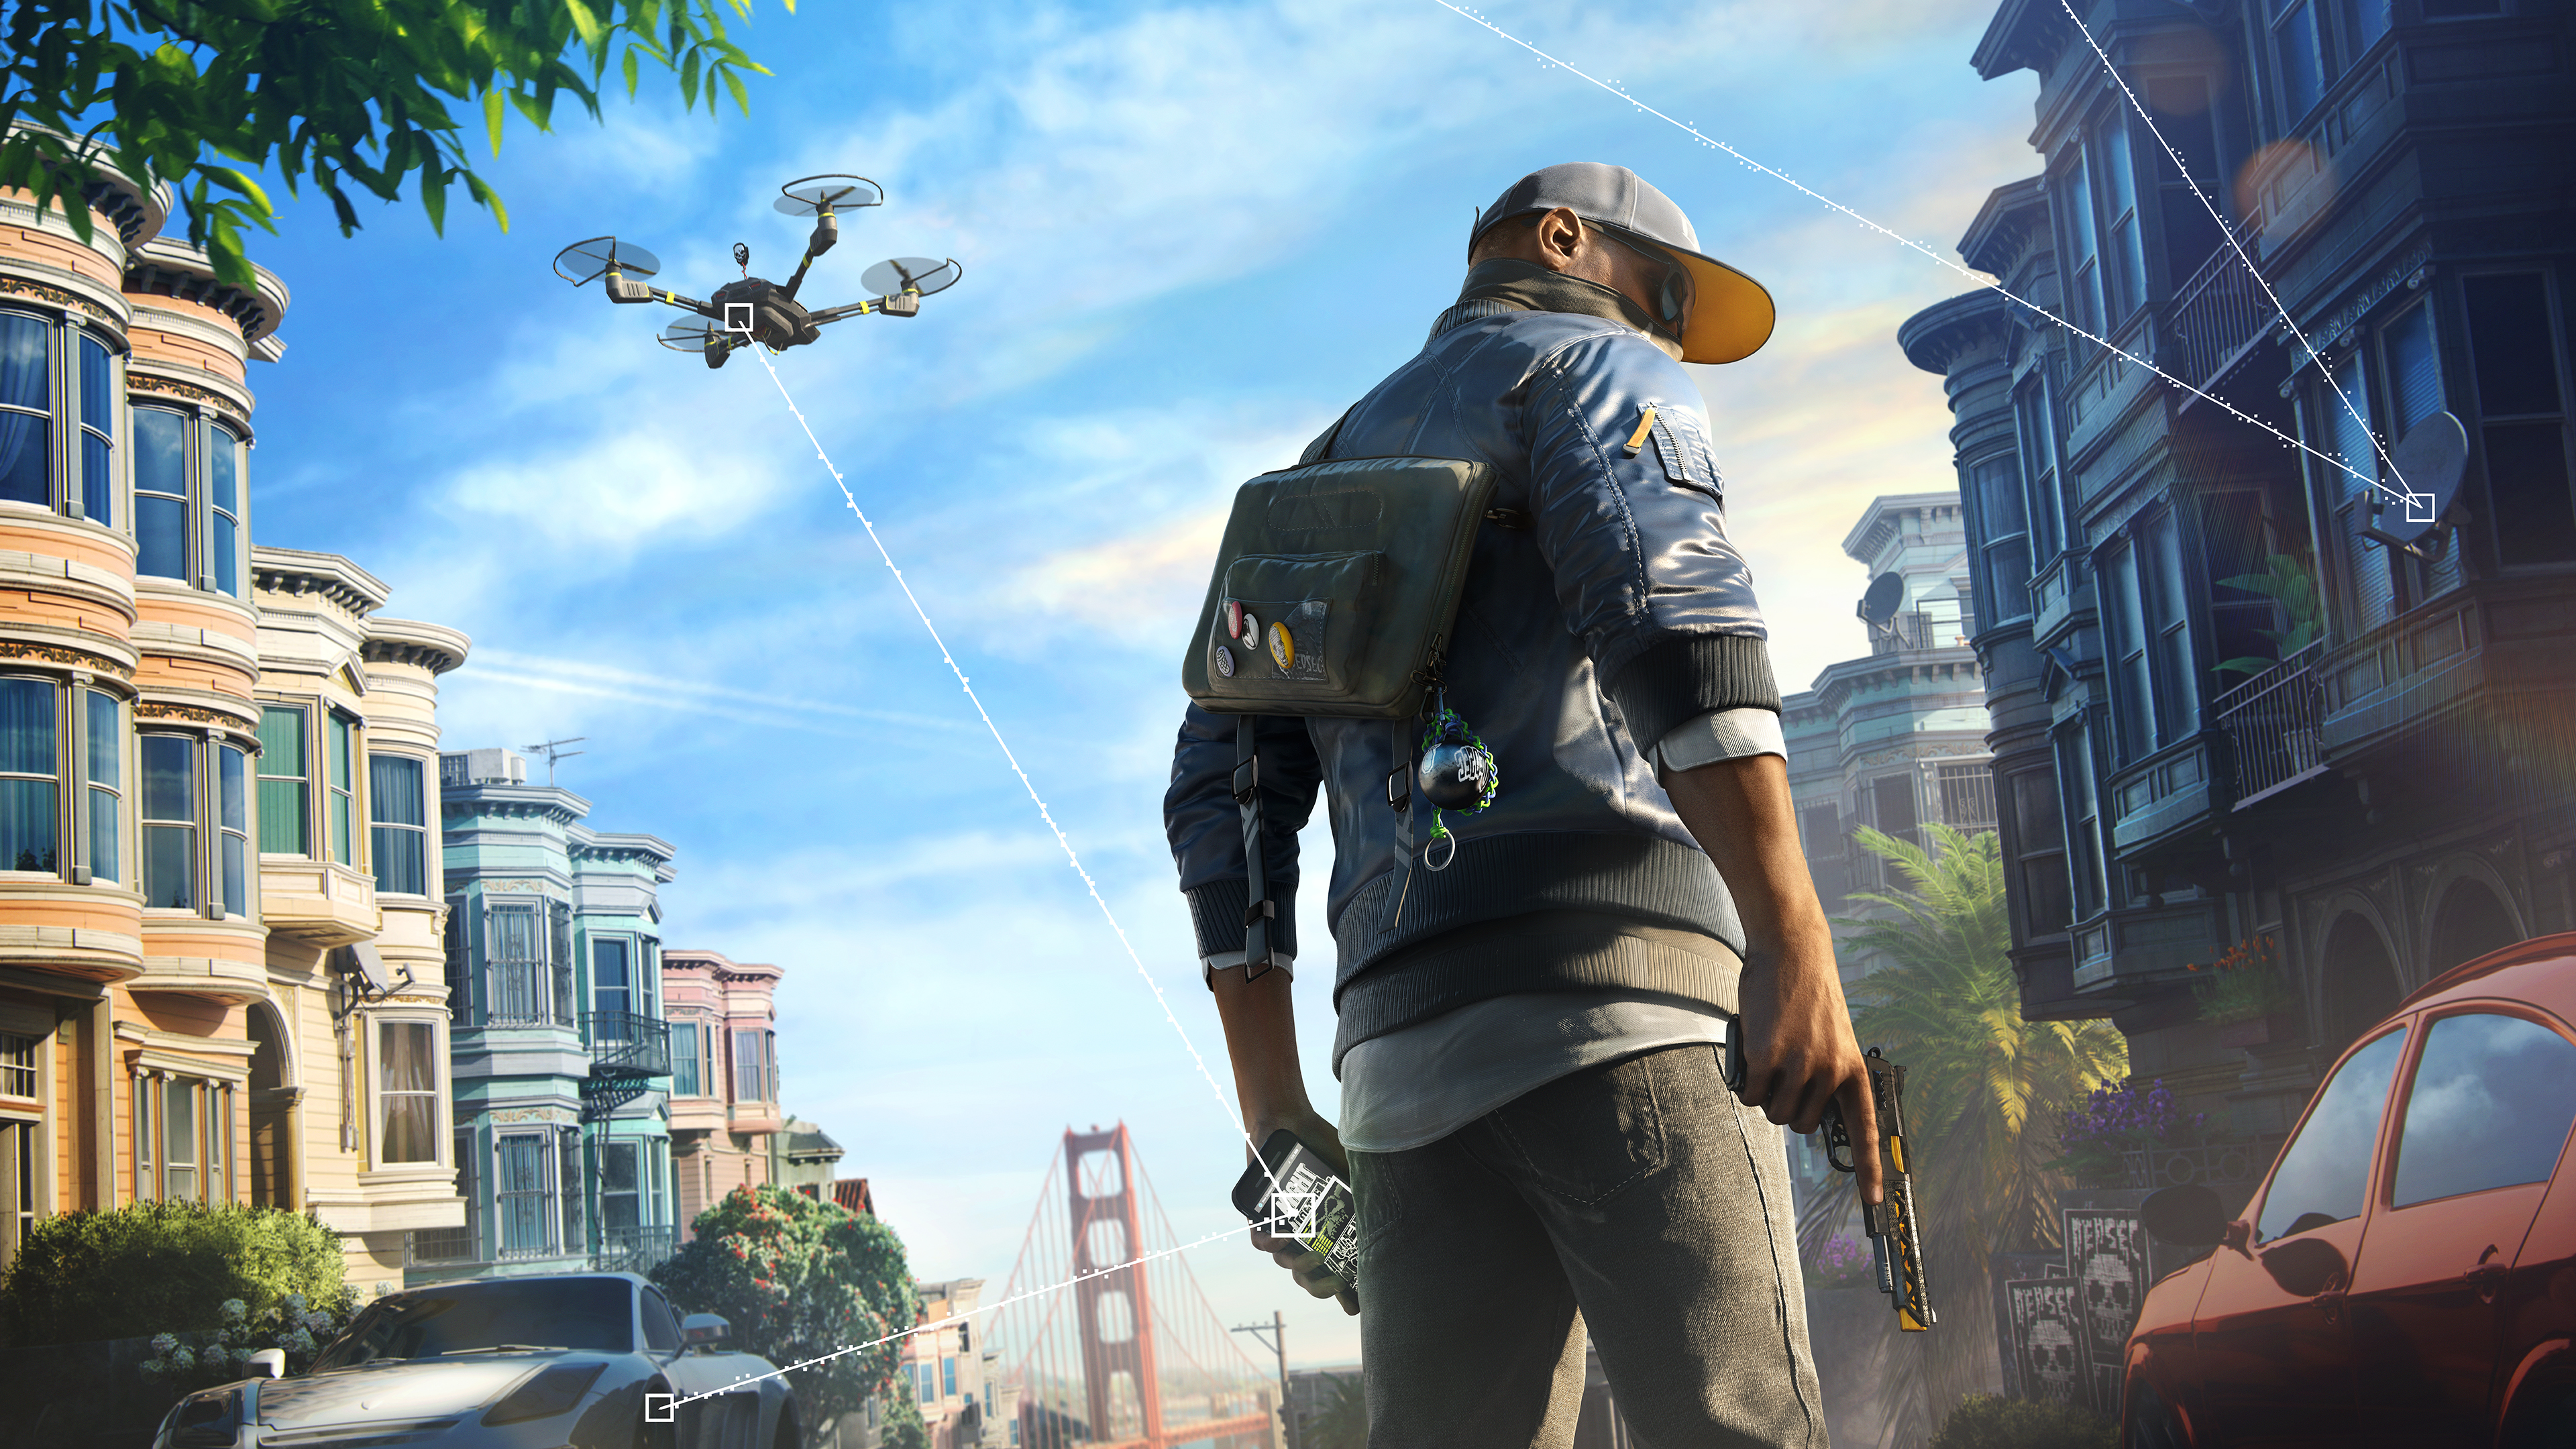 Watch Dogs Watch Dogs 2 Pistol Video Games Drone Hacking Standing Phone City 3840x2160